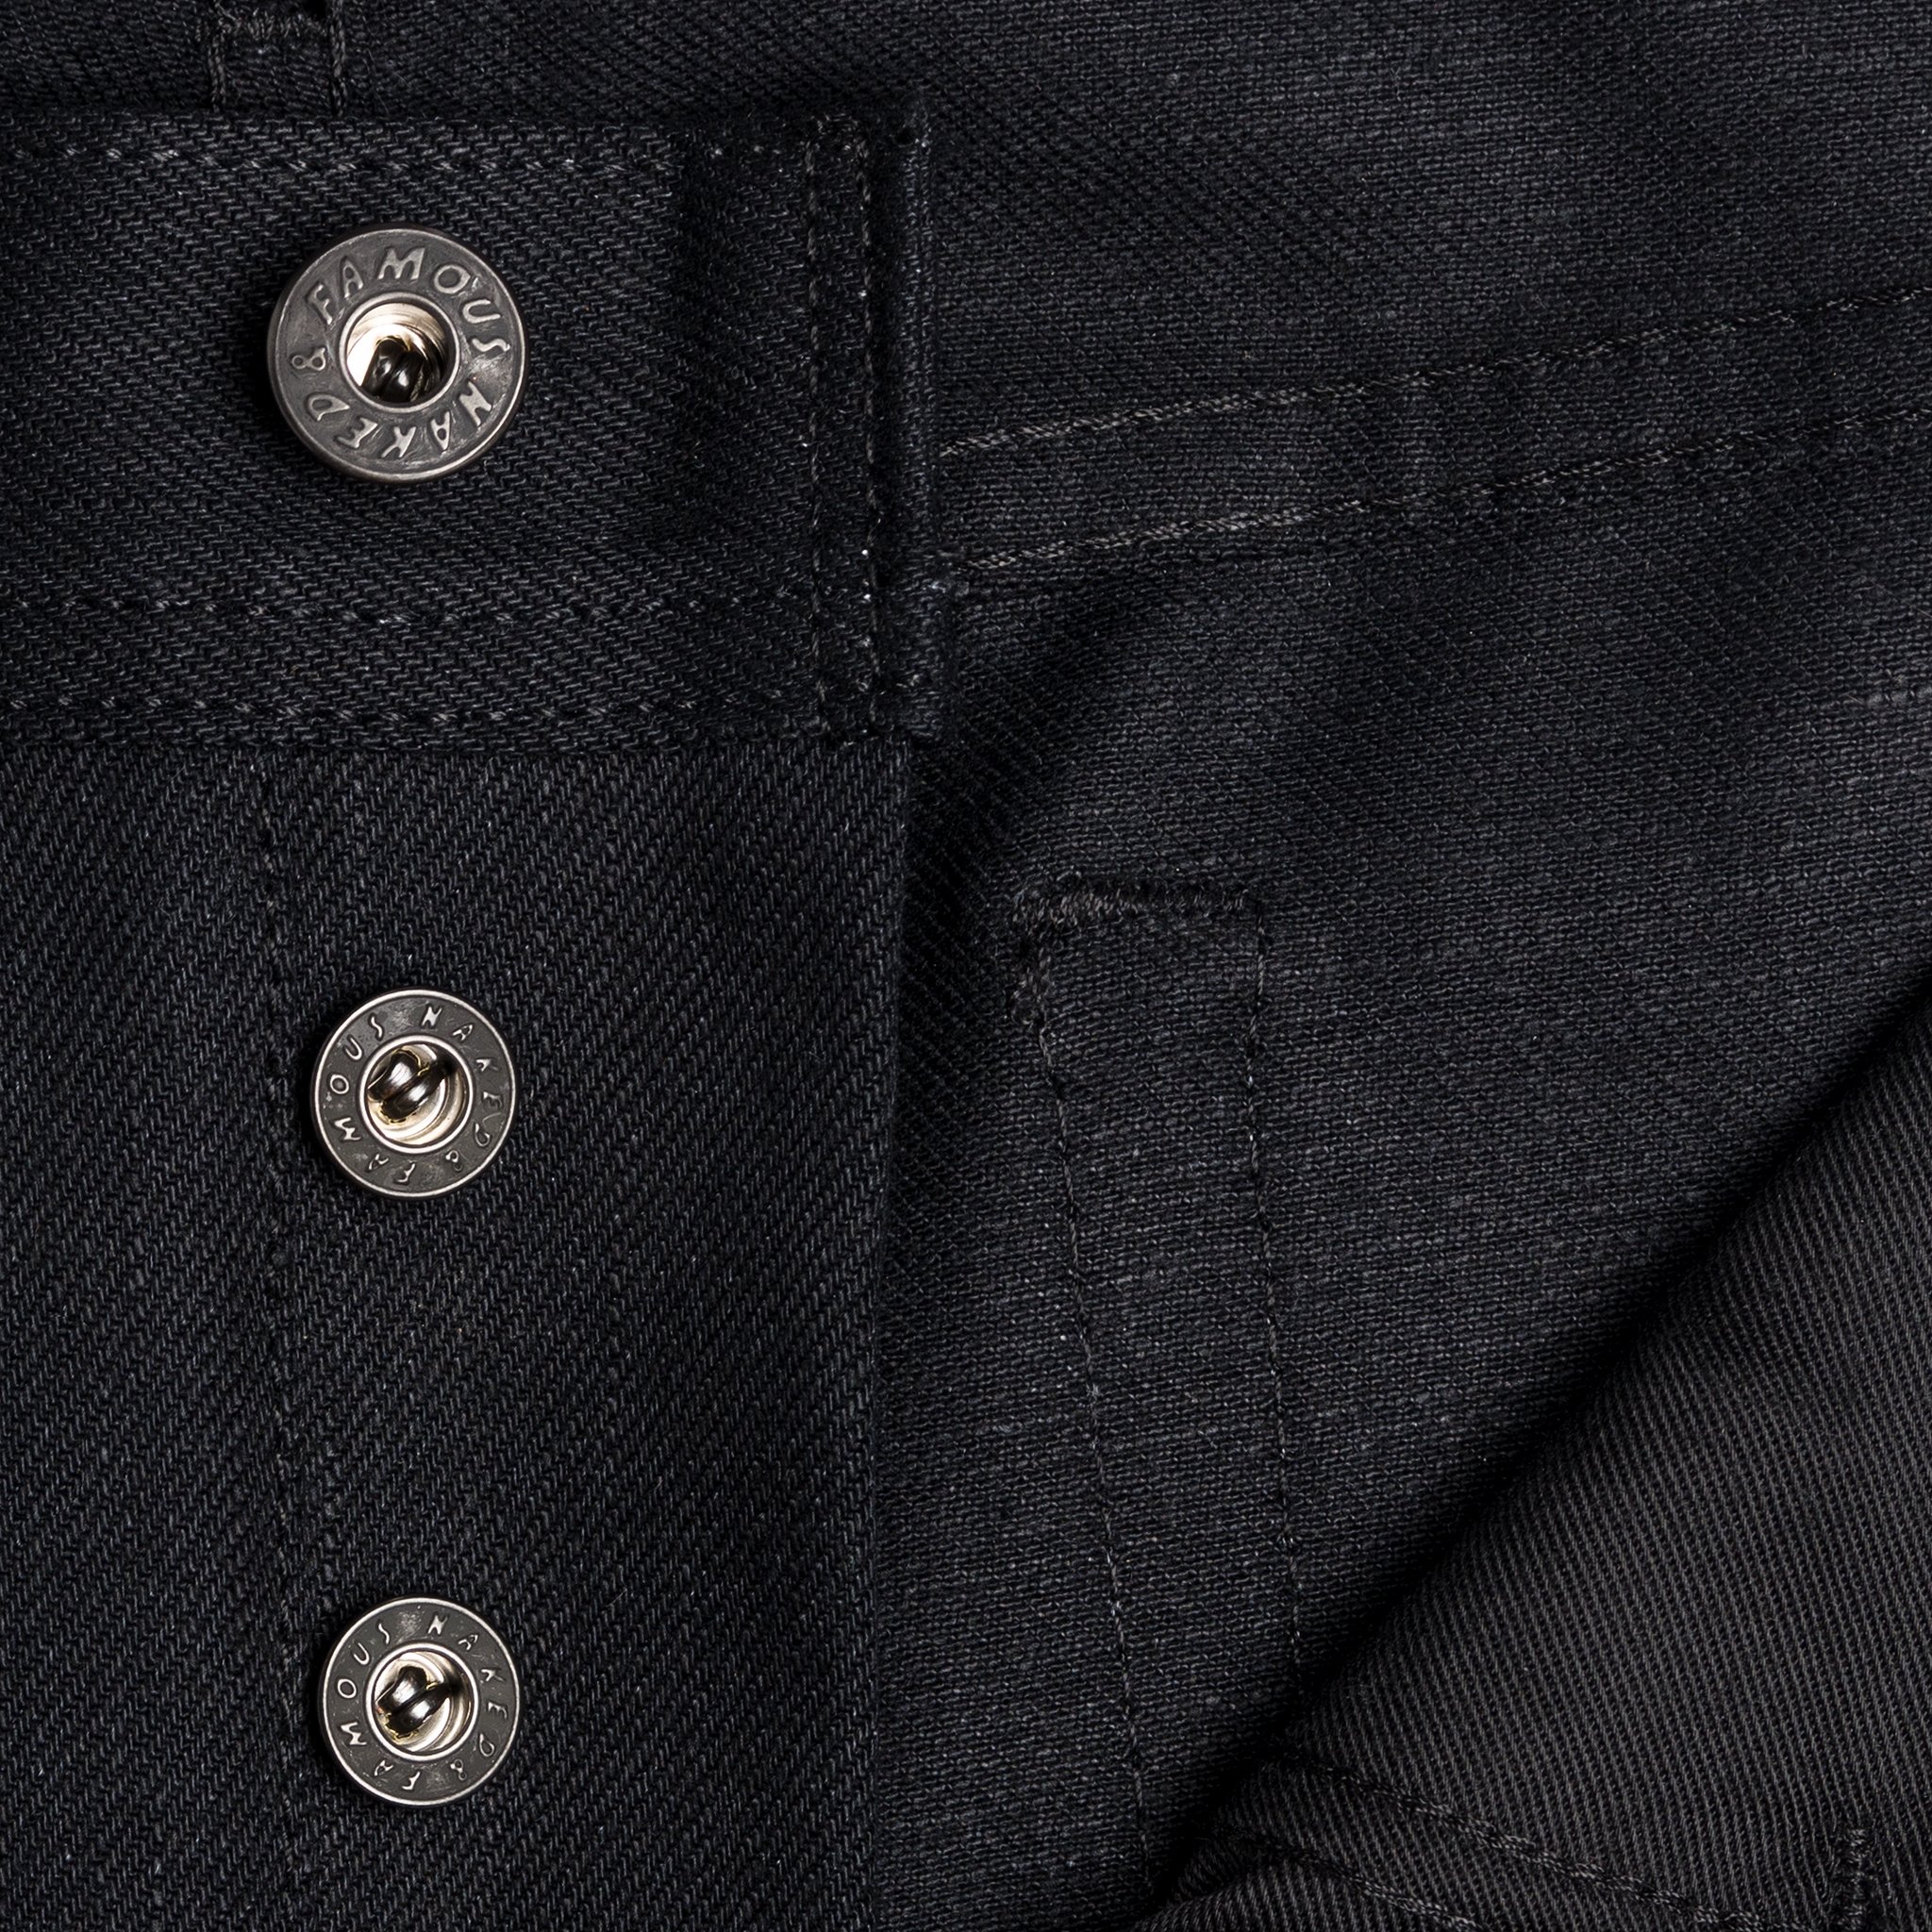  Solid Black Selvedge Jeans - Button Fly 